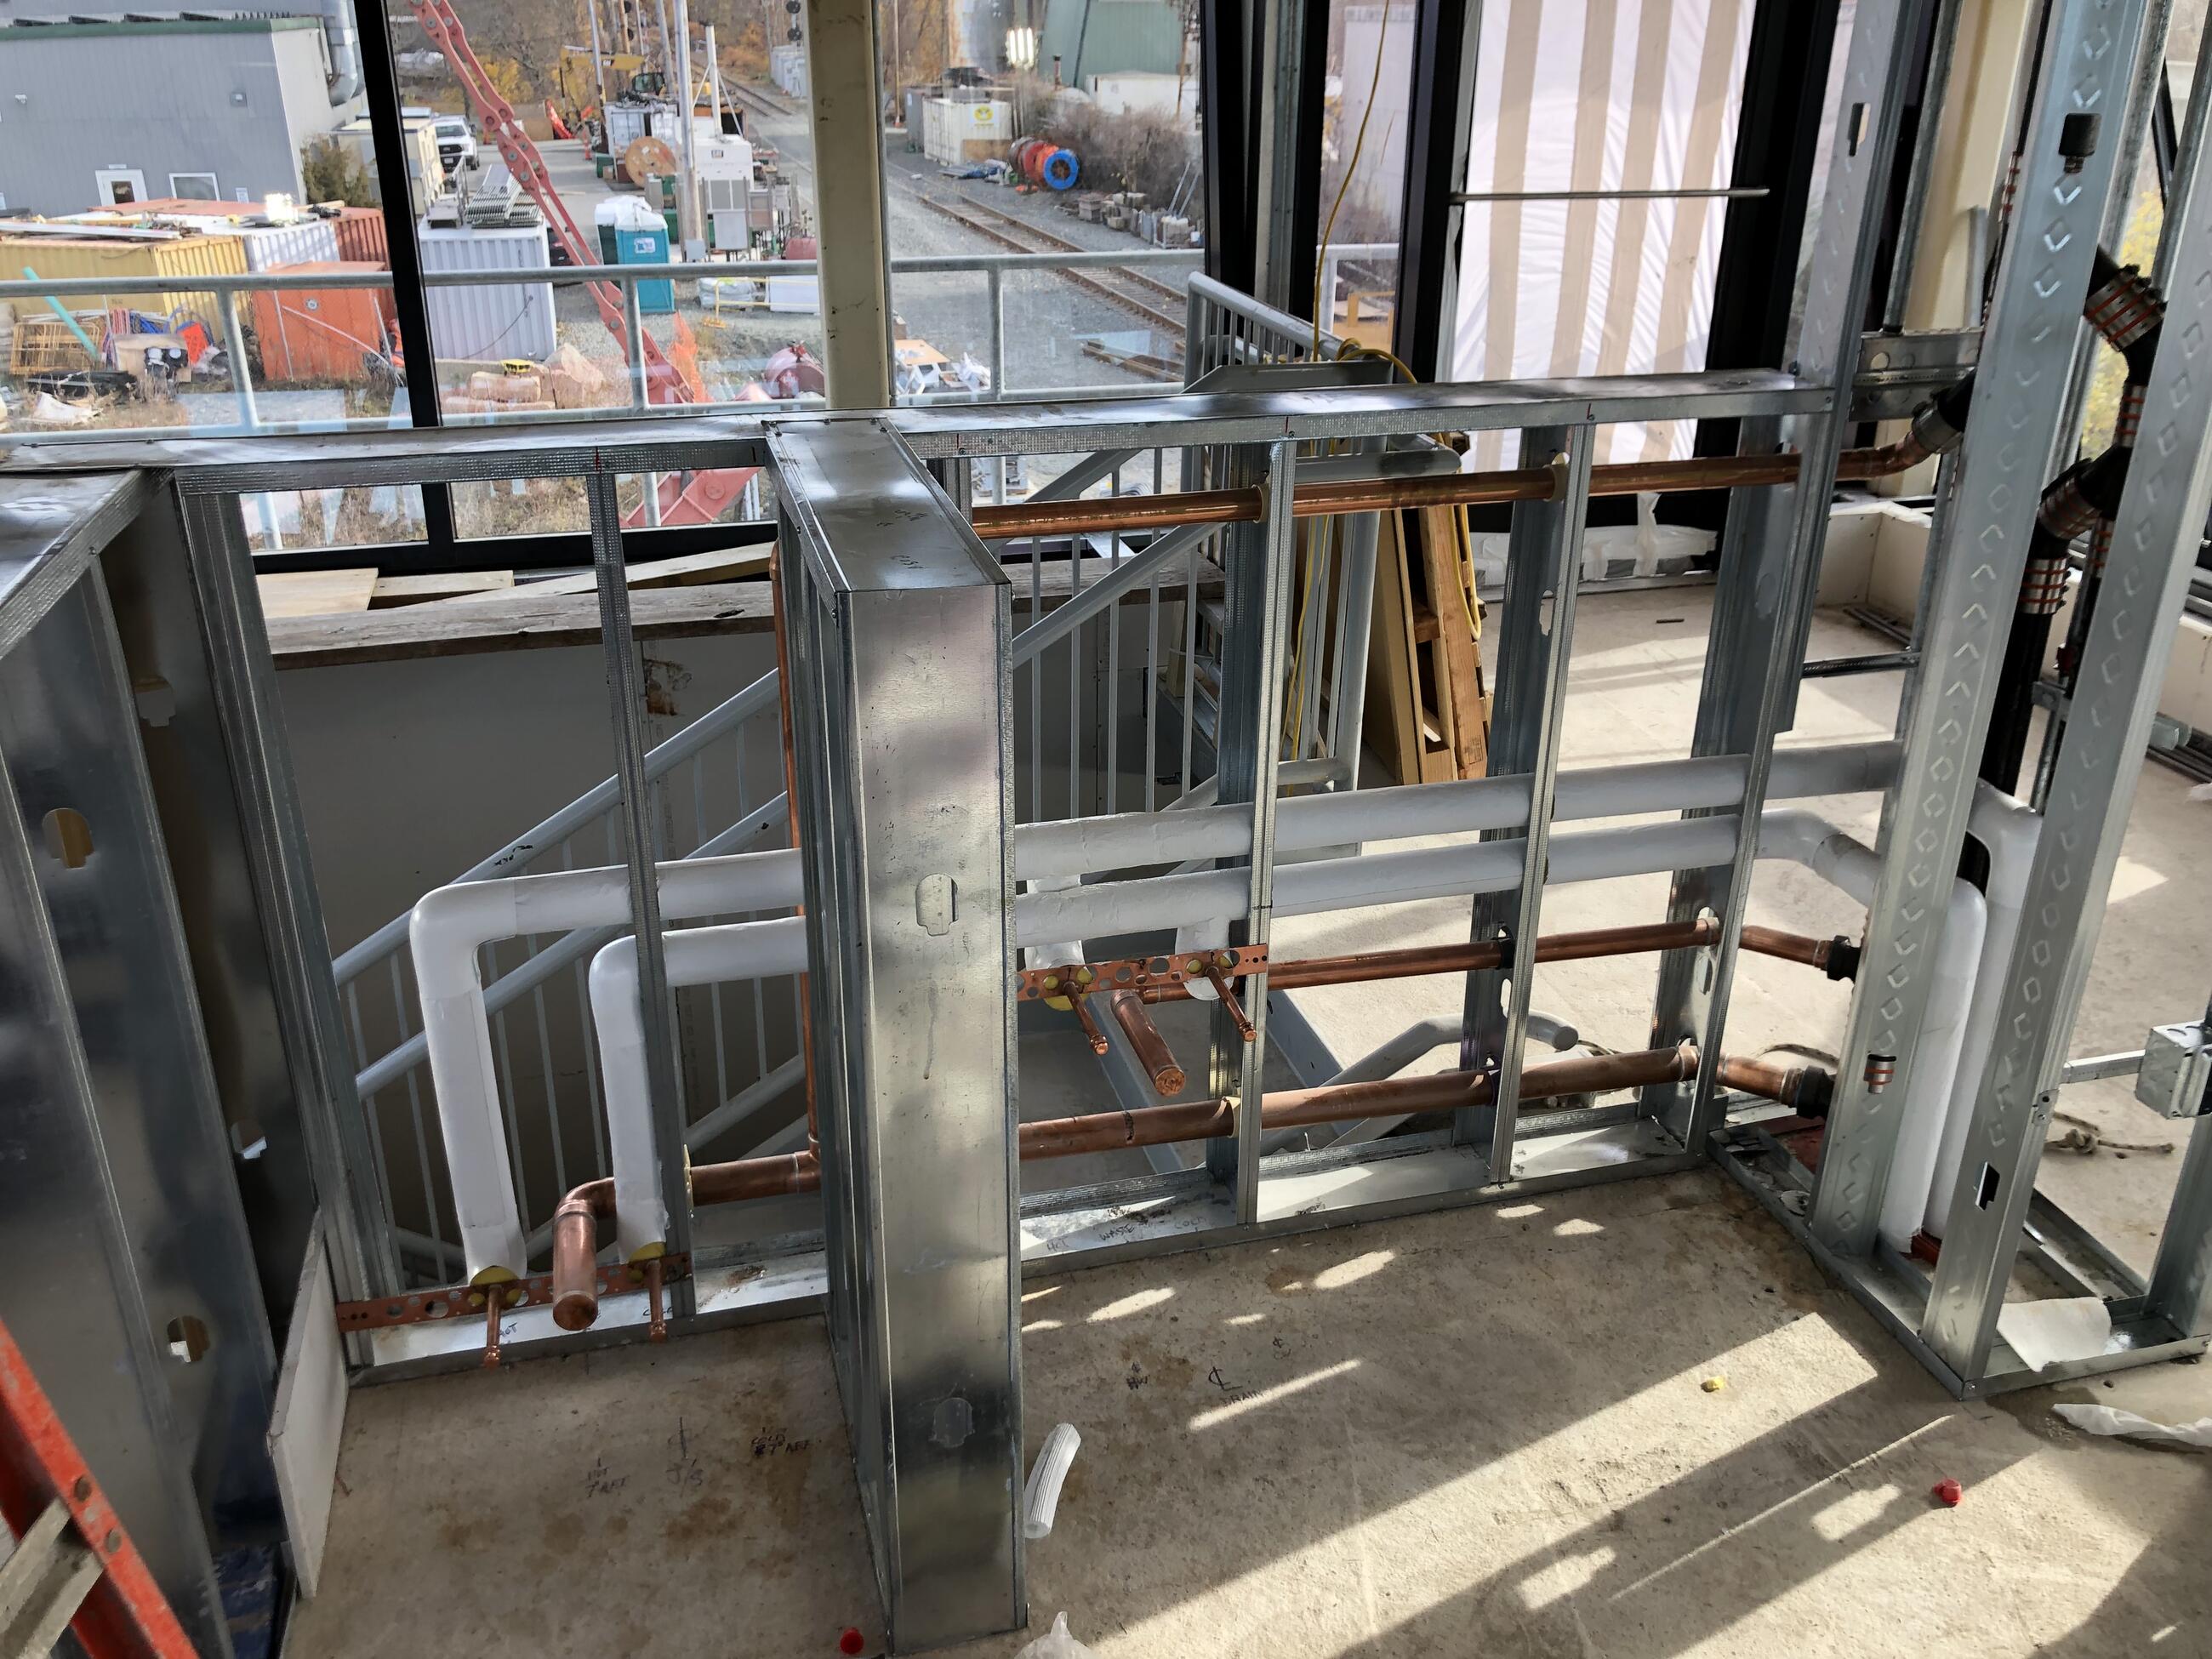 Image shows the metal structure where the control tower's kitchenette will be installed. Copper plumbing pipes have been installed within the metal structure. The view faces a window overlooking construction materials and train tracks. 